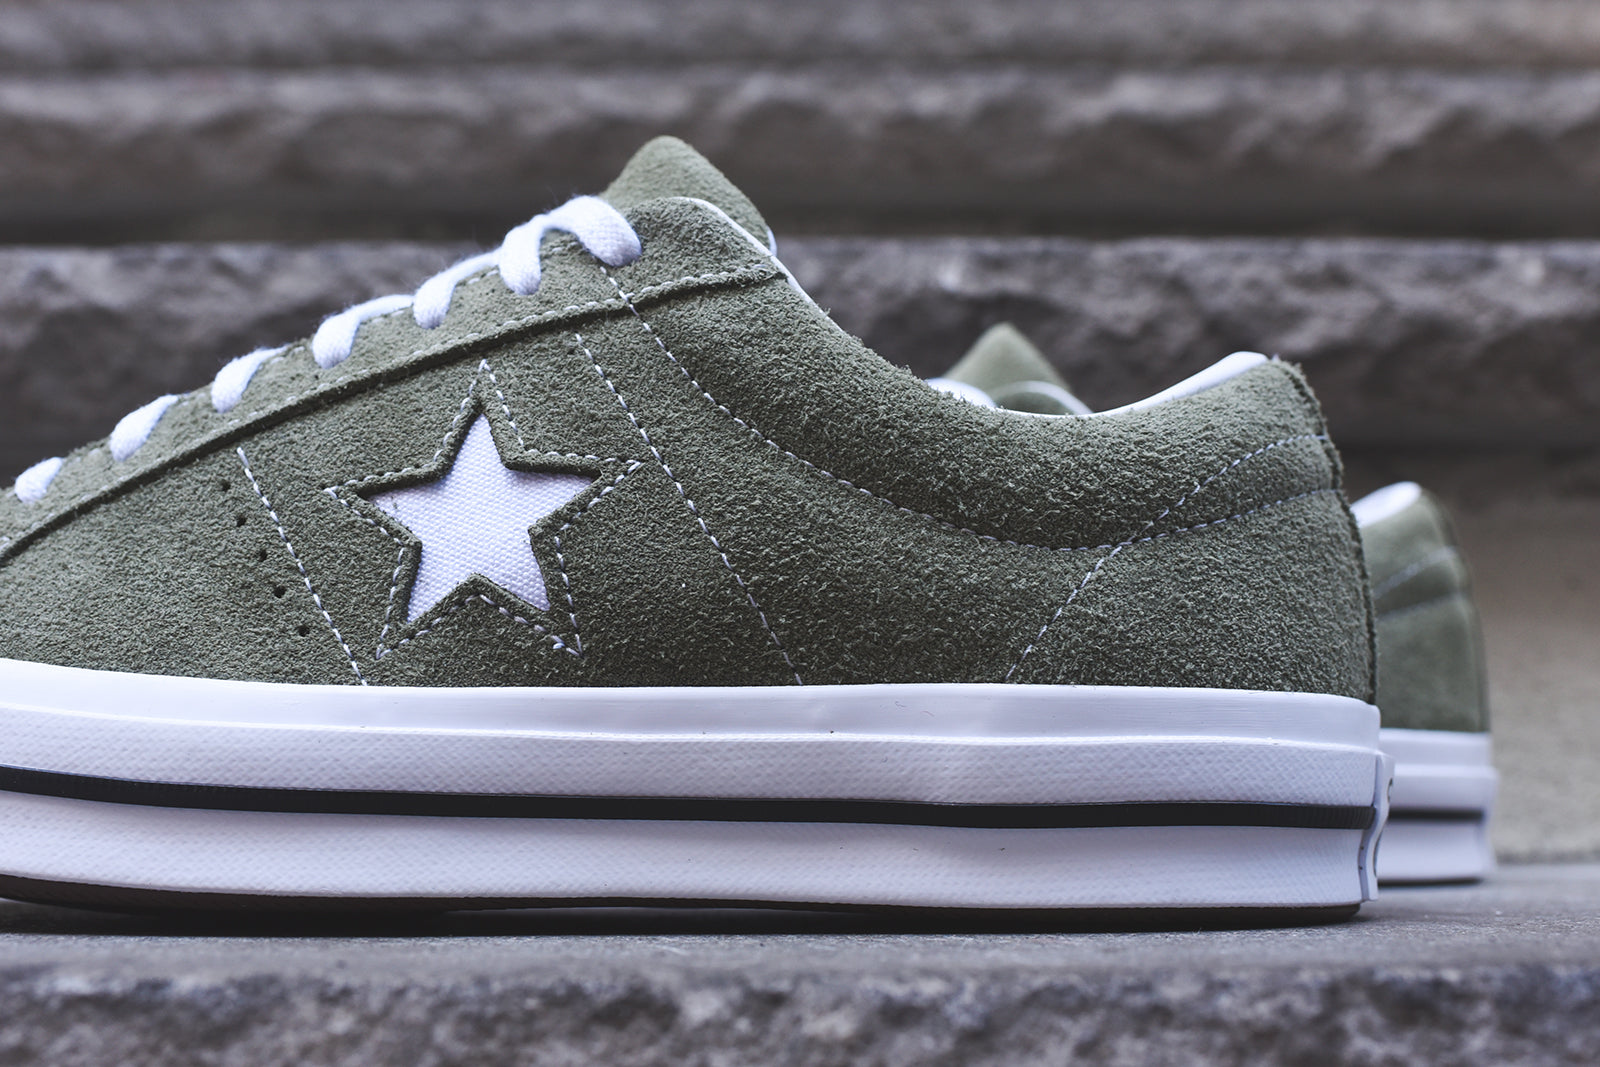 Converse One Star - Olive / White – Kith